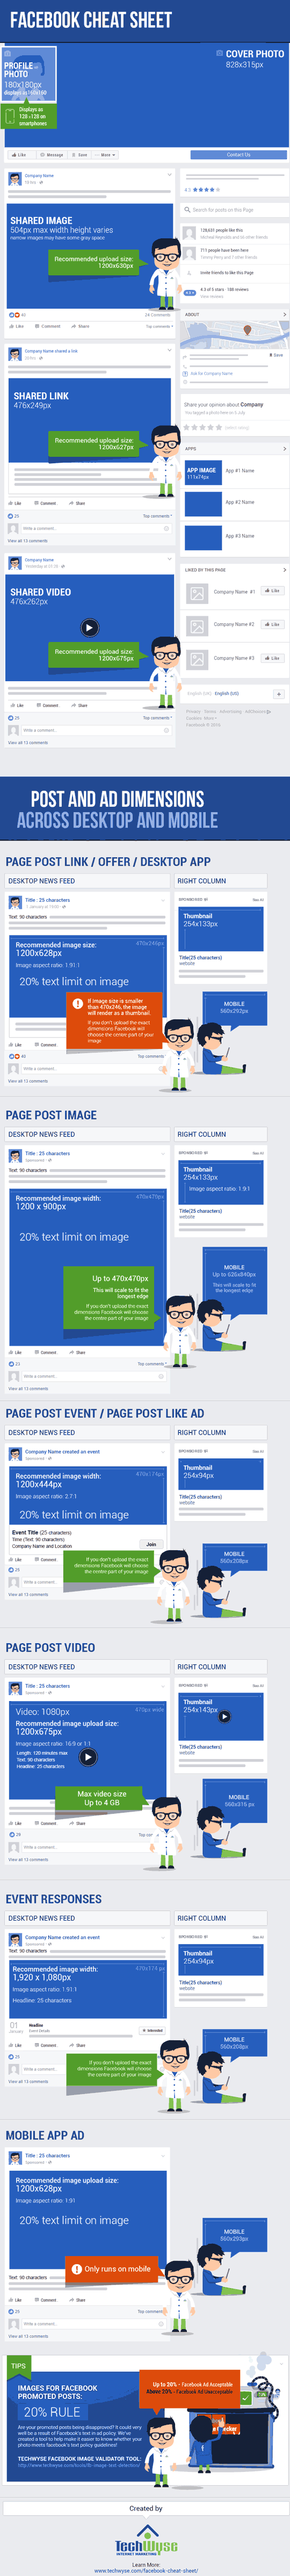 A Cheat Sheet For All The Image Dimensions For Facebook